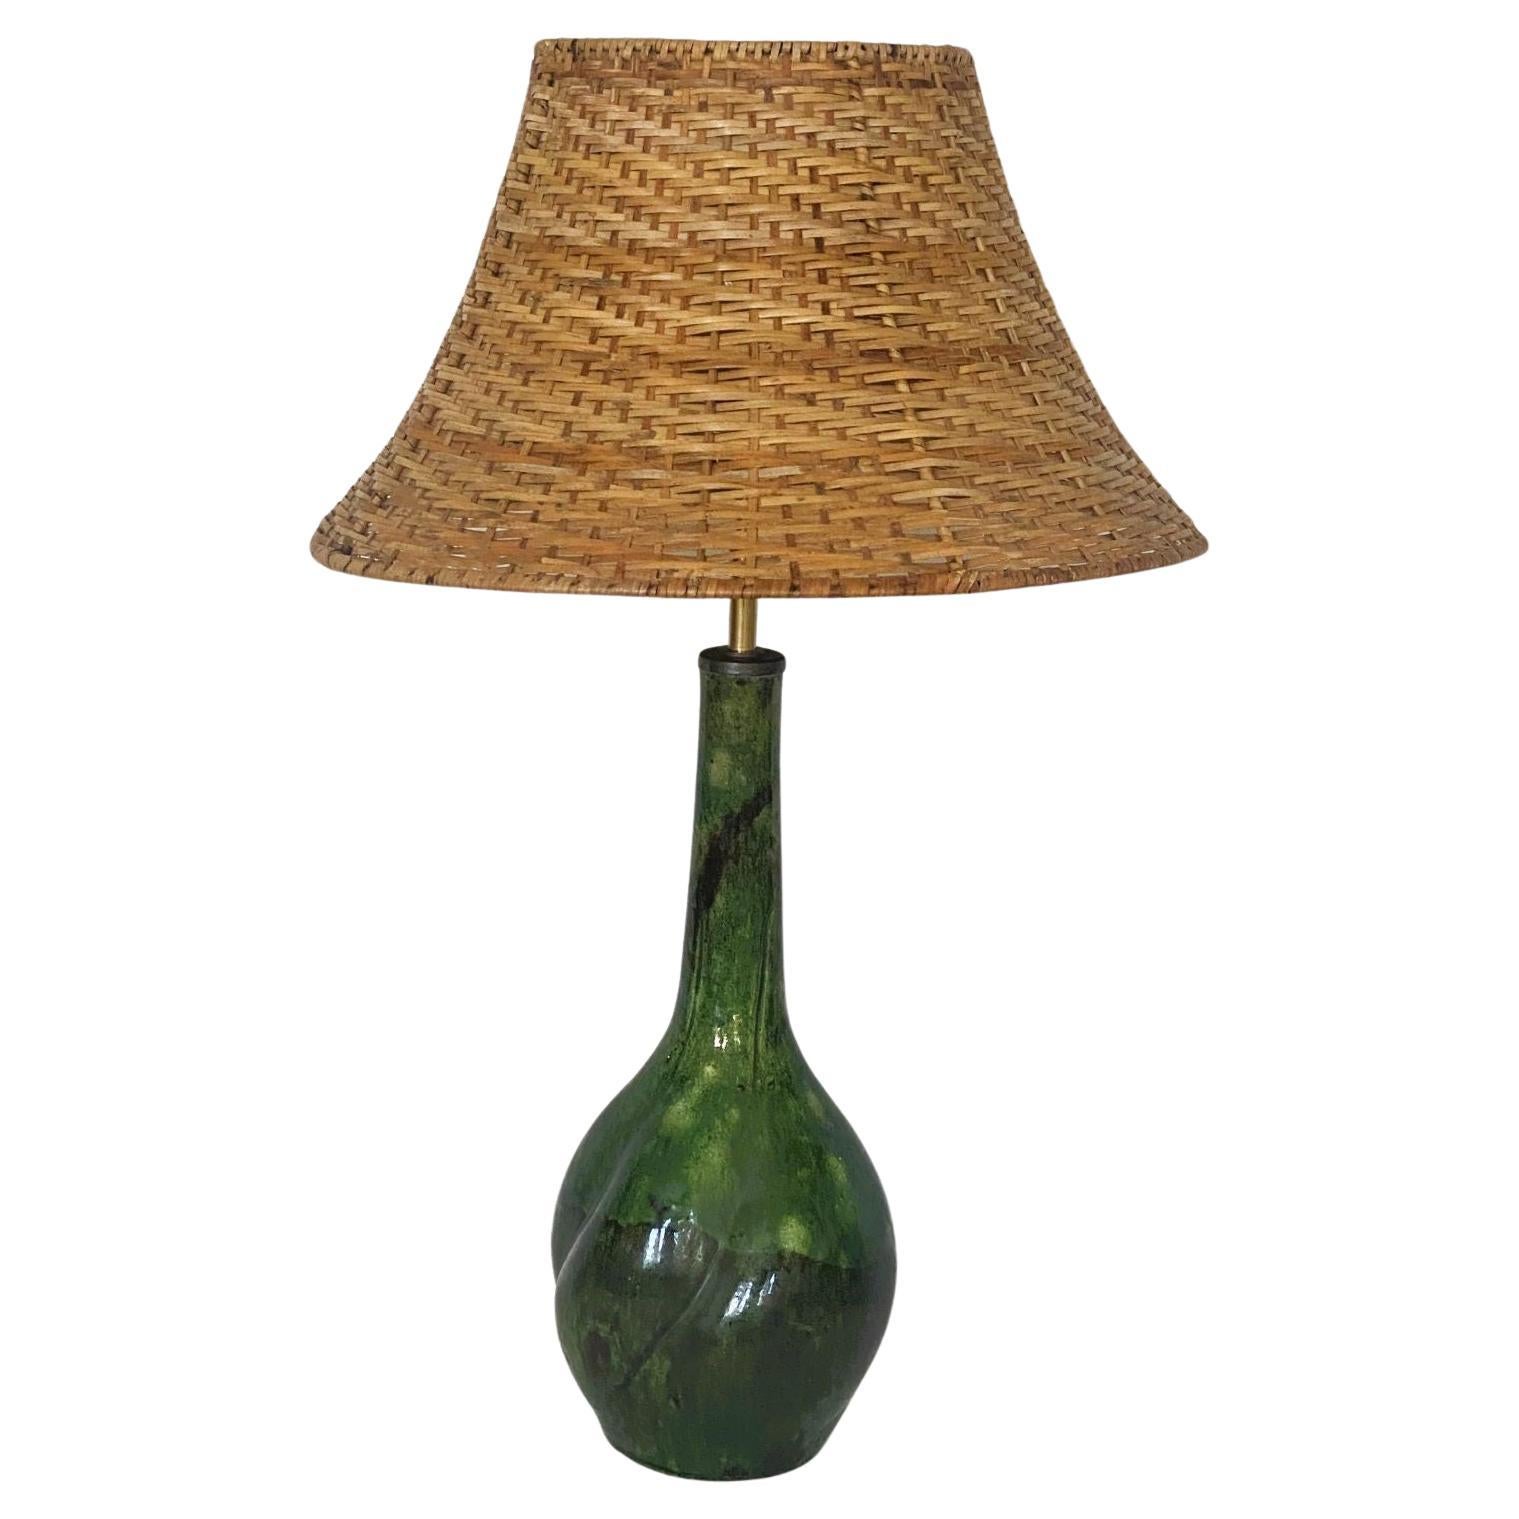 Danish Hand-Painted Glased Ceramic Table Lamp with Wicker Shade, 1960s